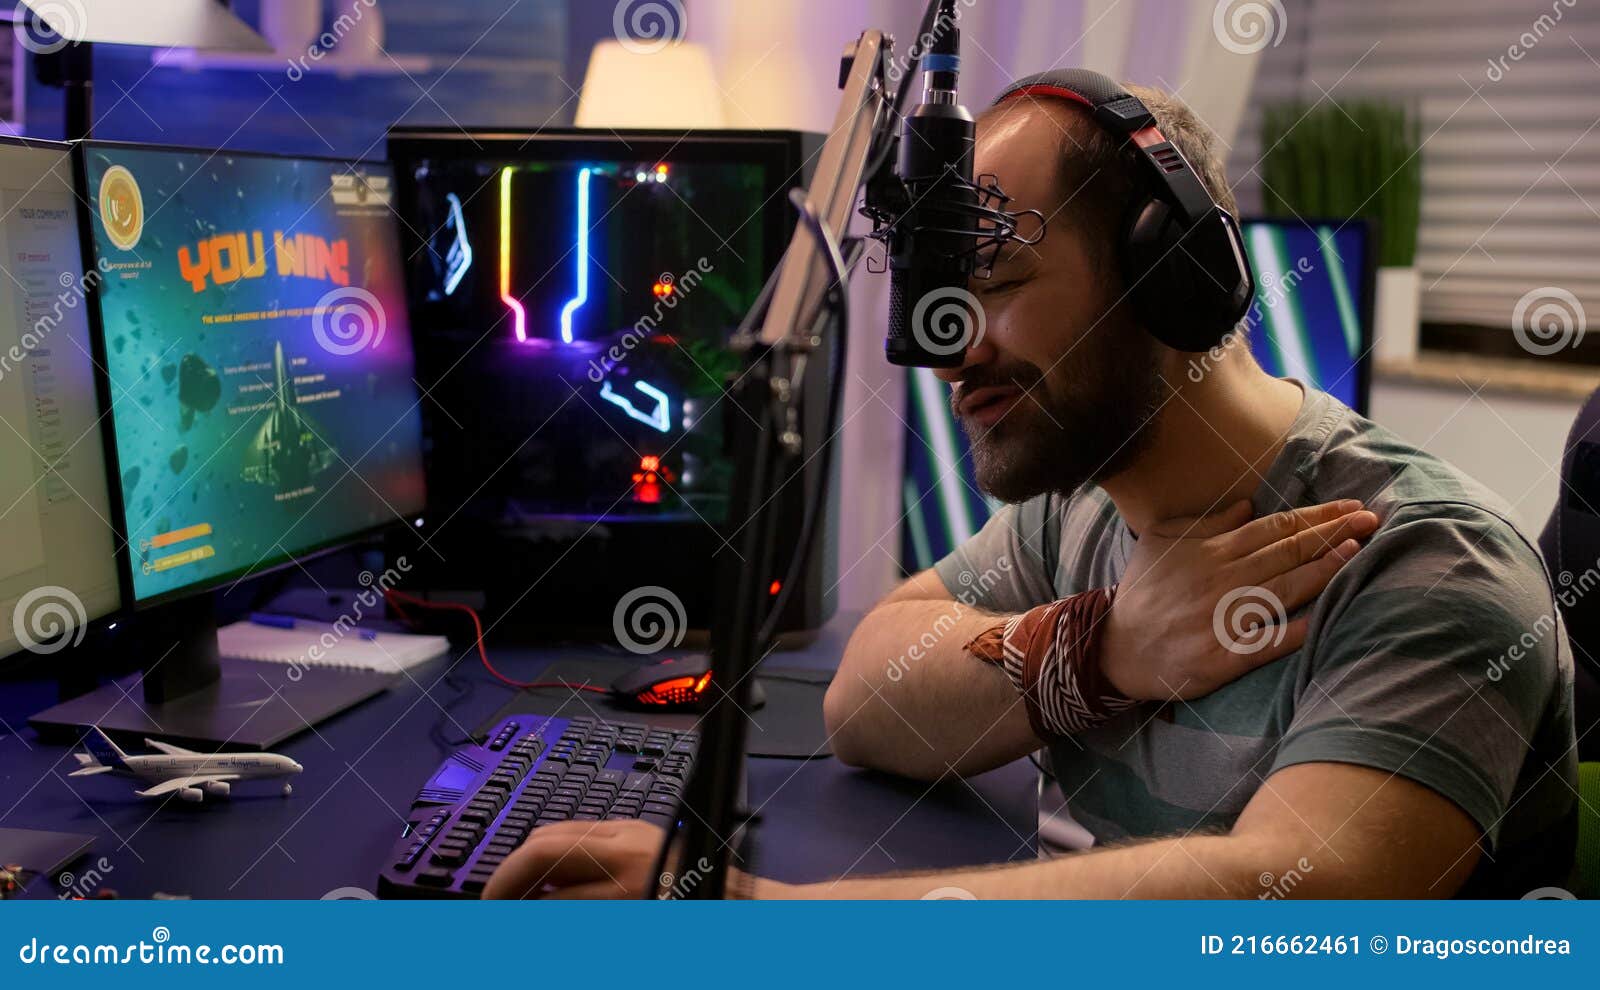 Winner Streamer Playing Online Space Shooter Game in Gaming Room Stock Image